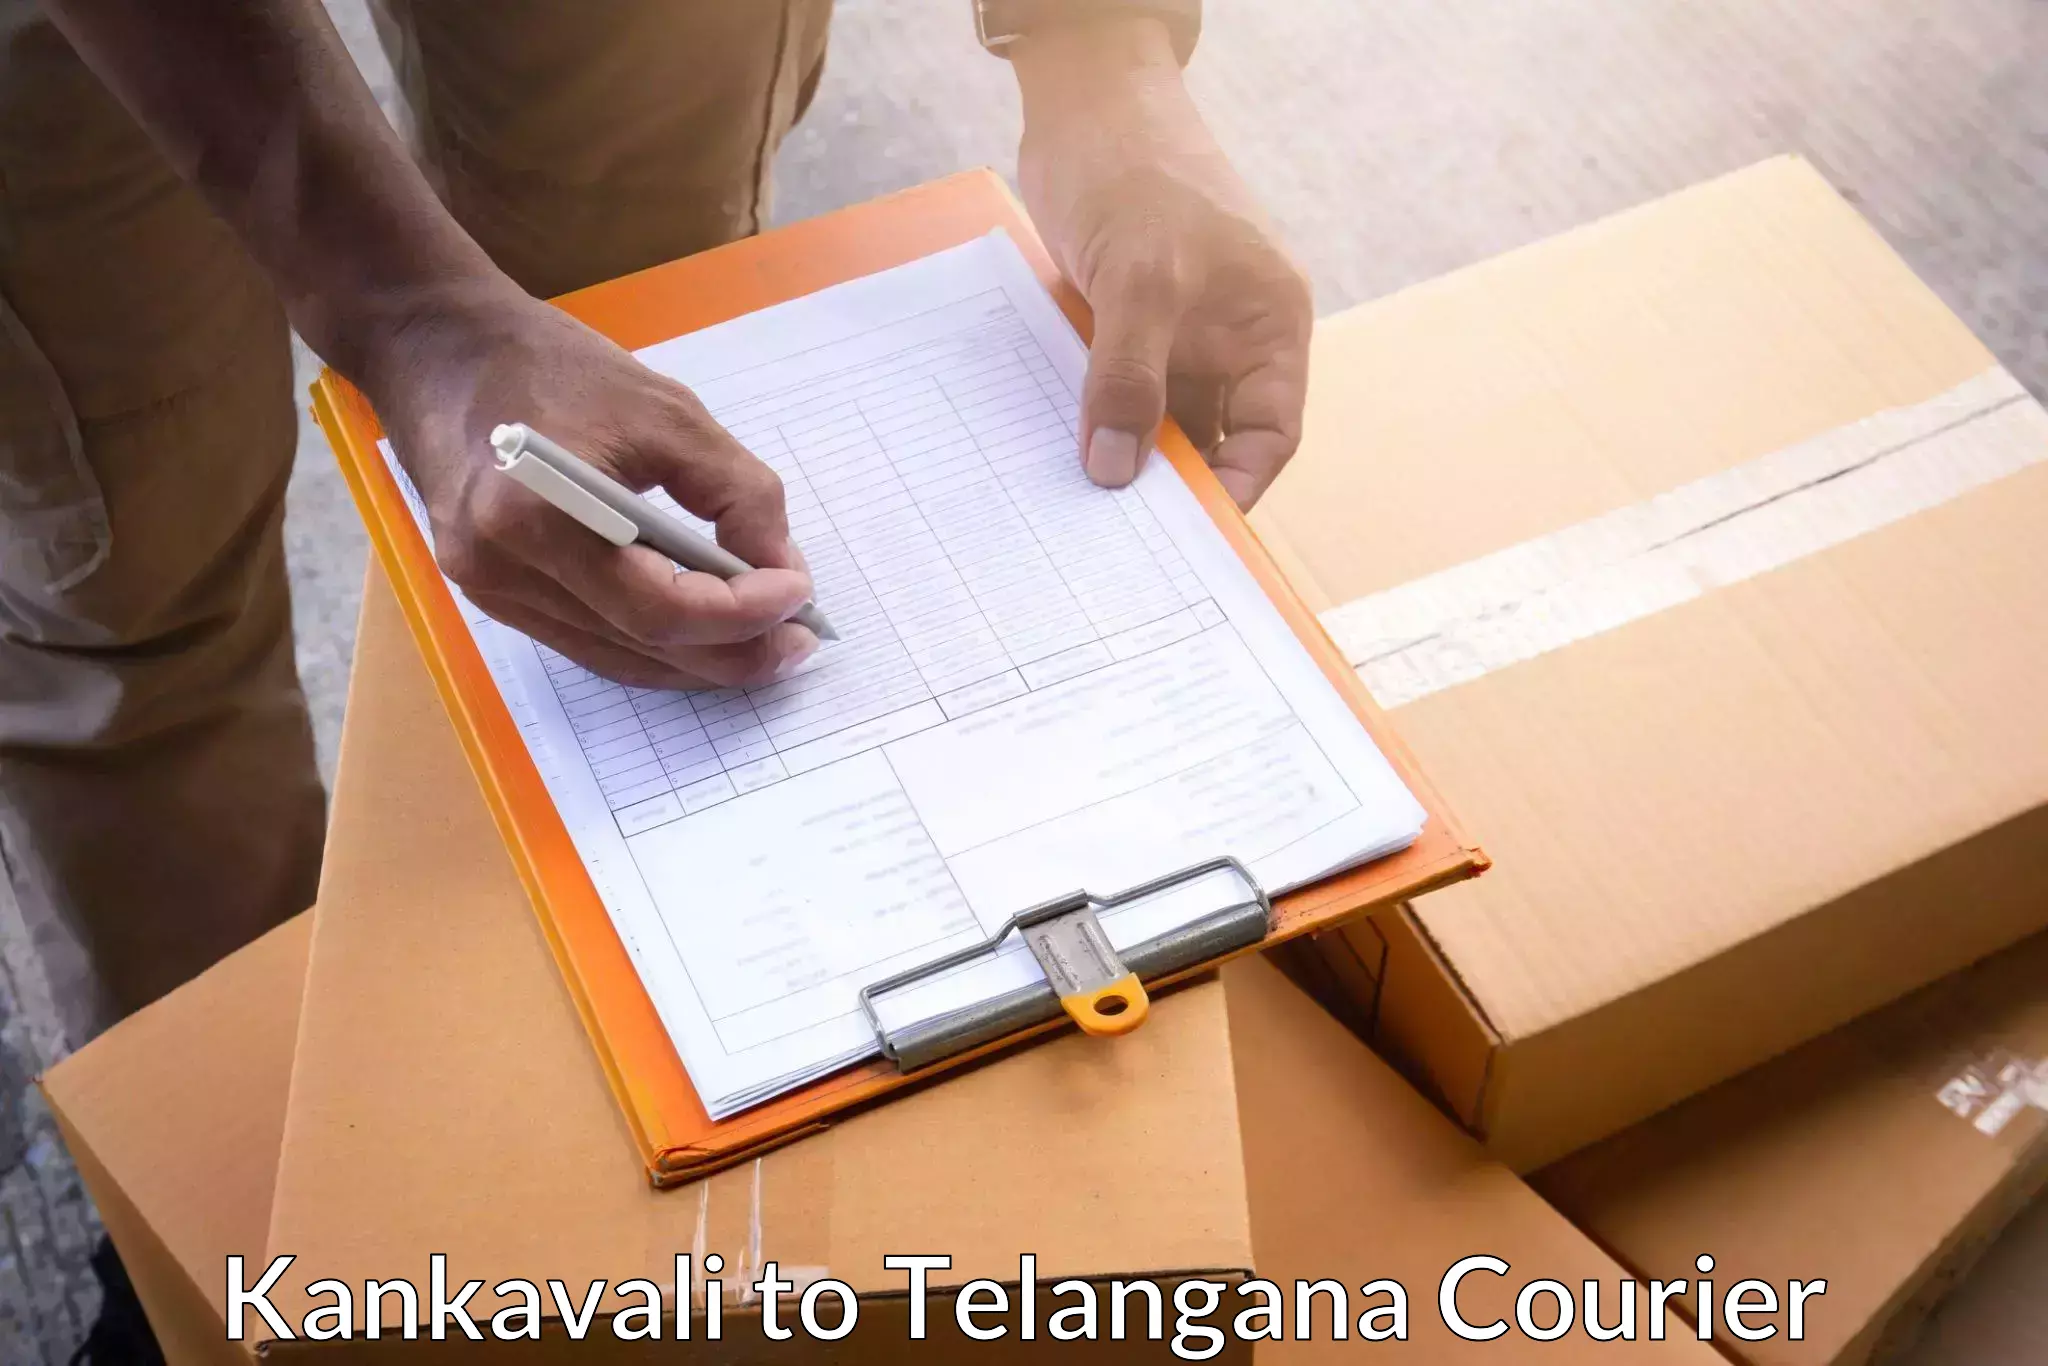 Residential courier service in Kankavali to Kamalapur